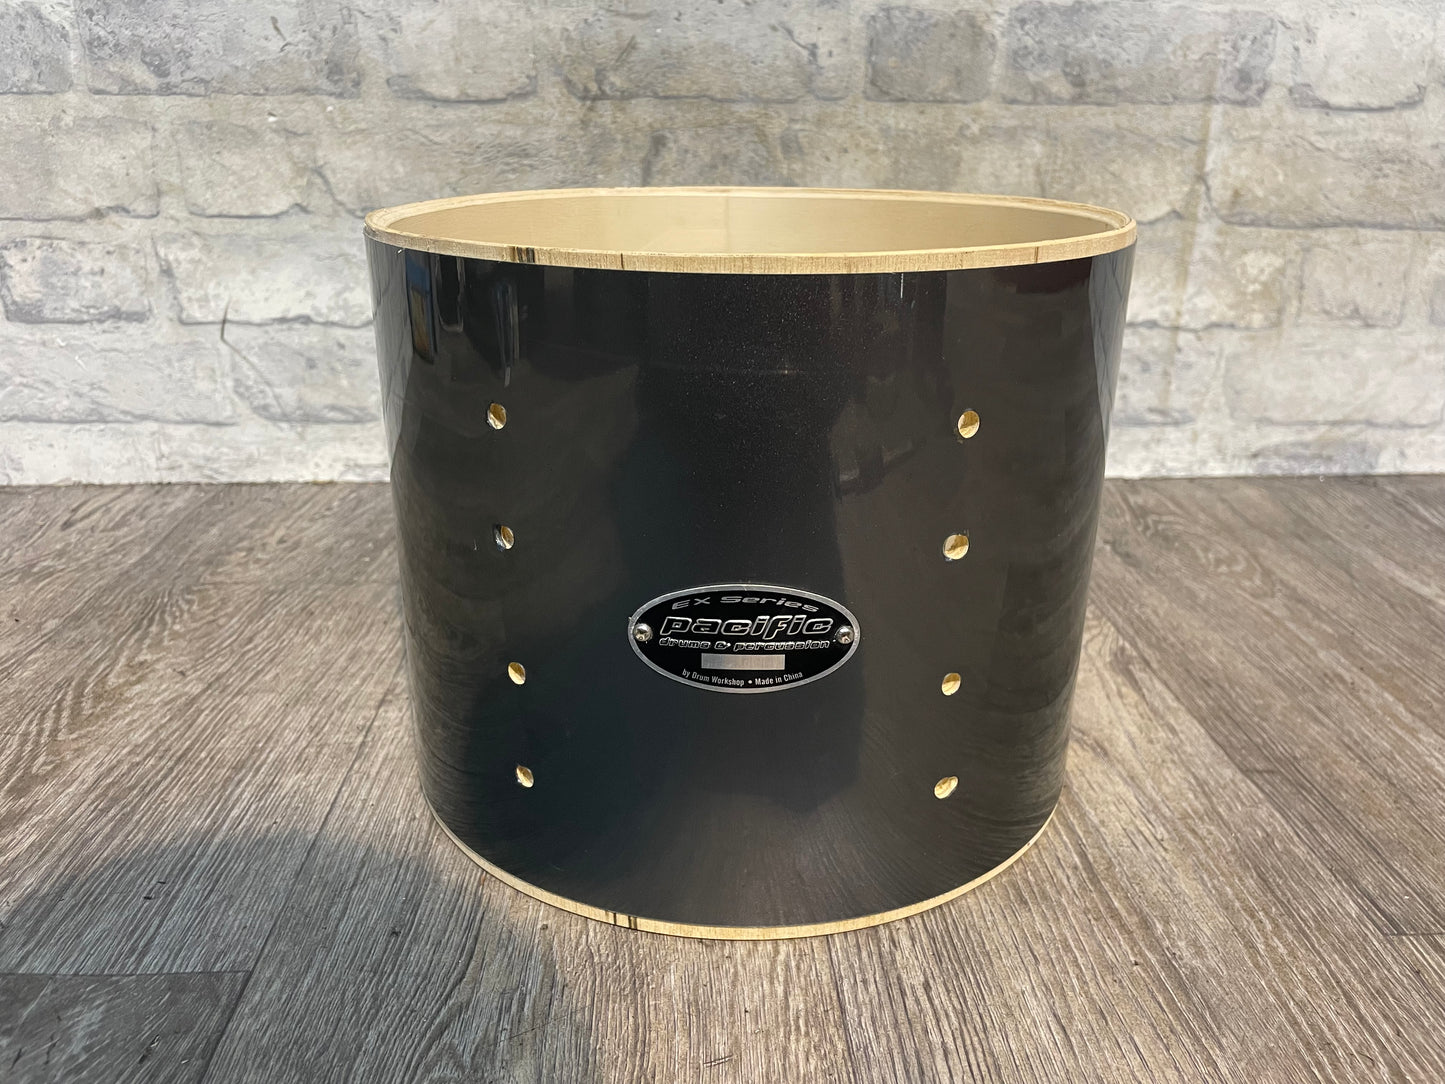 PDP Pacific EX Tom Drum Shell 10”x8” Bare Wood Project #R23